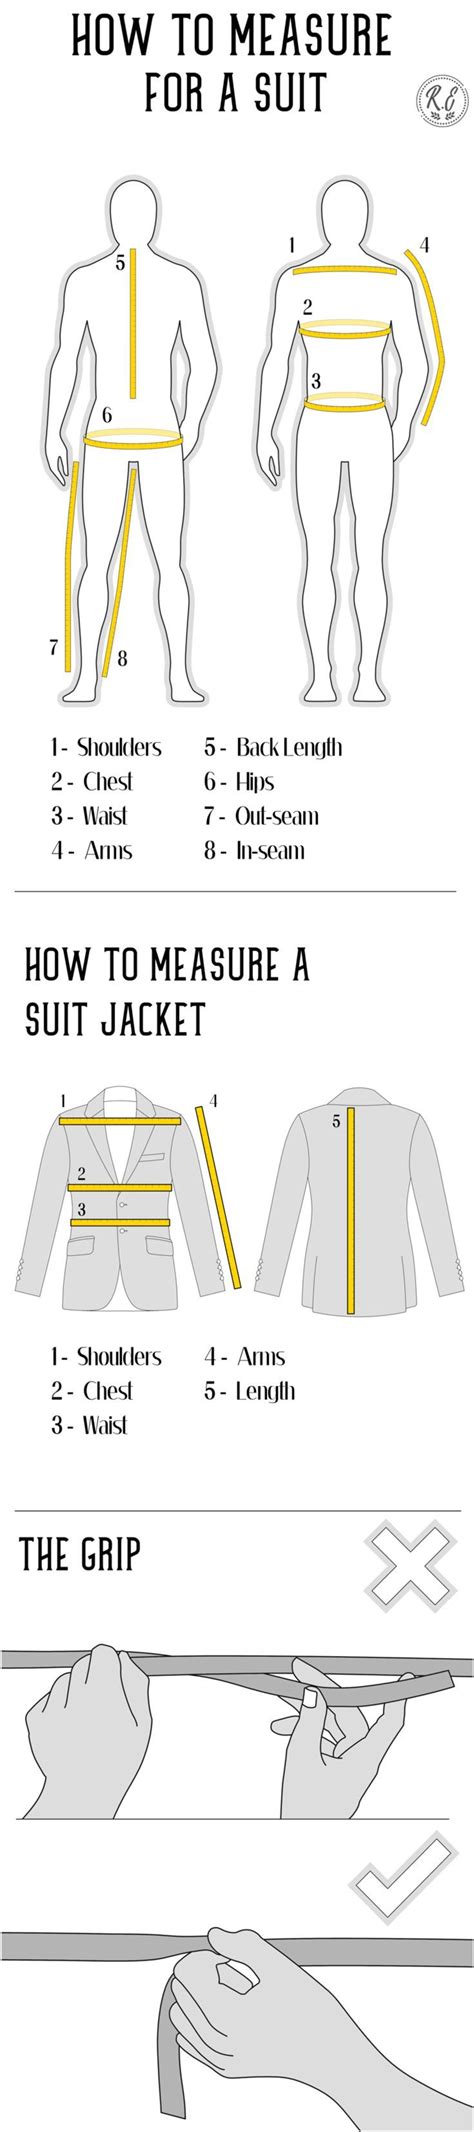 Fashion Infographic How To Measure For A Suit